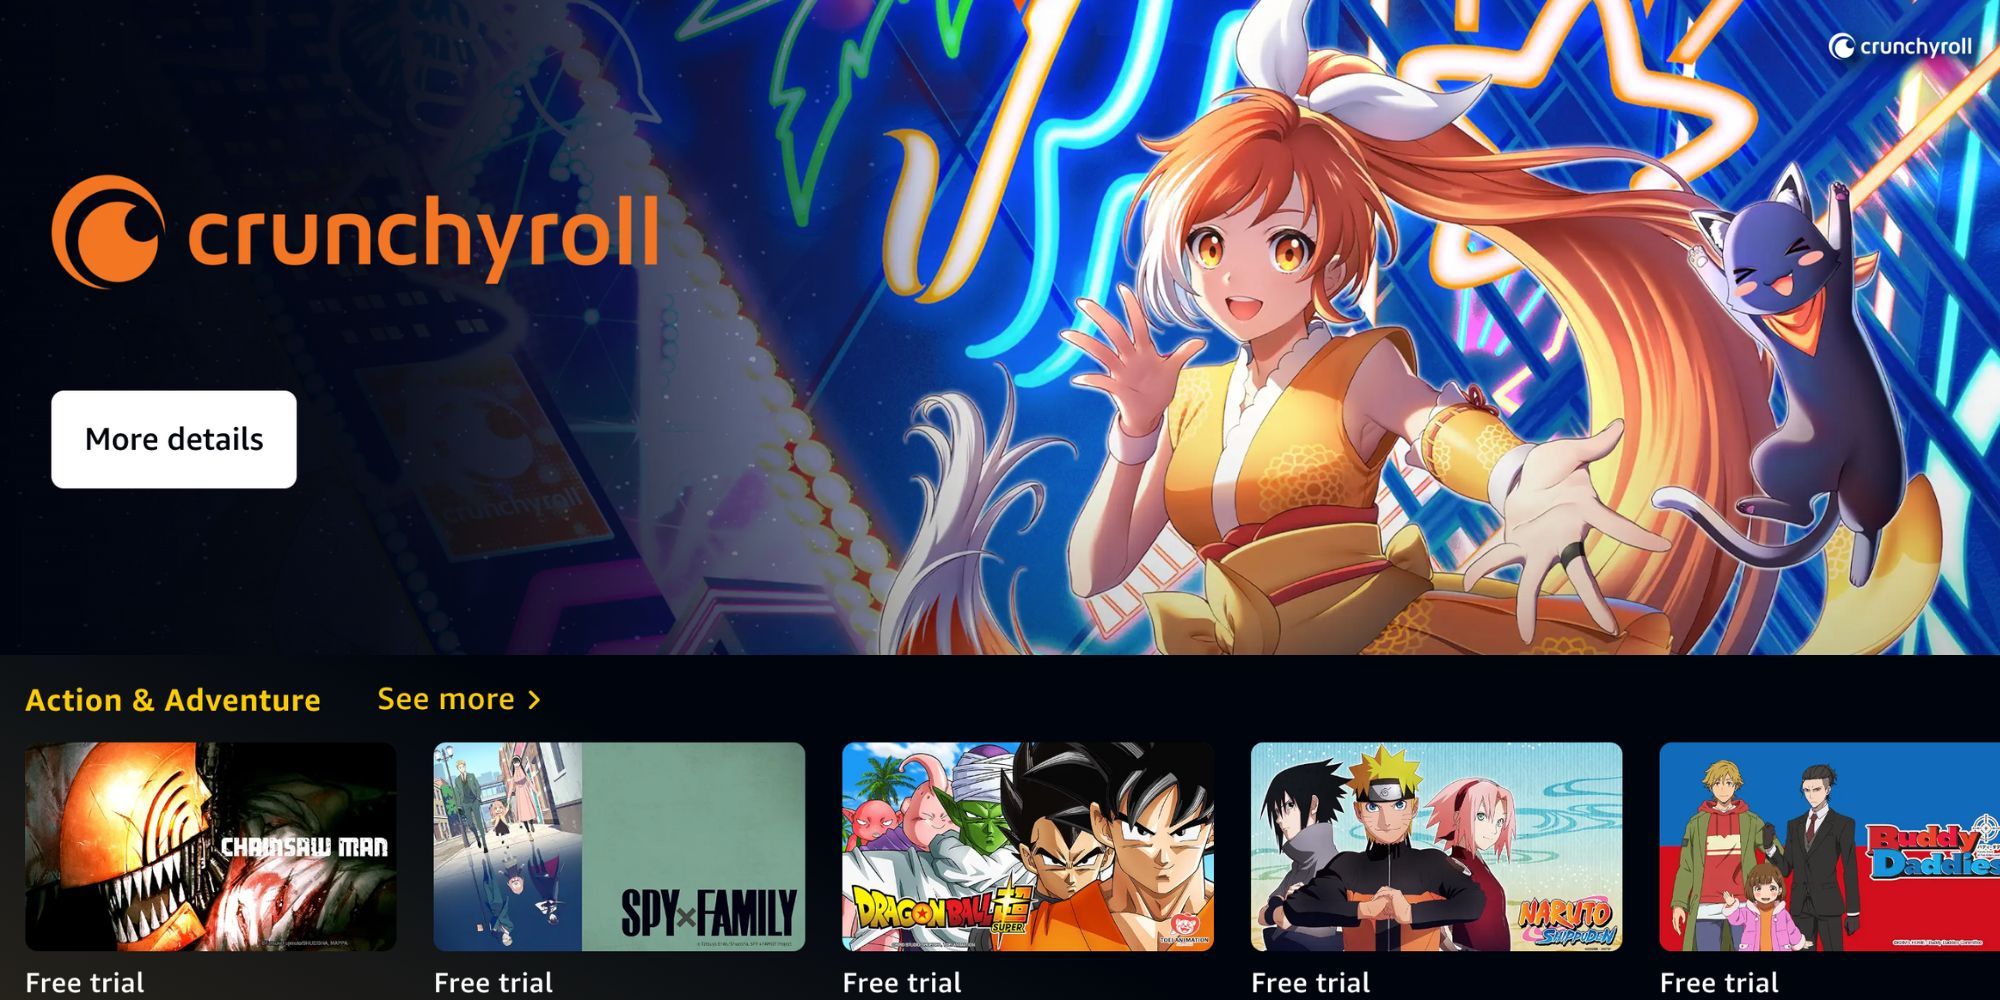 How to watch popular anime from Crunchyroll on Prime Video